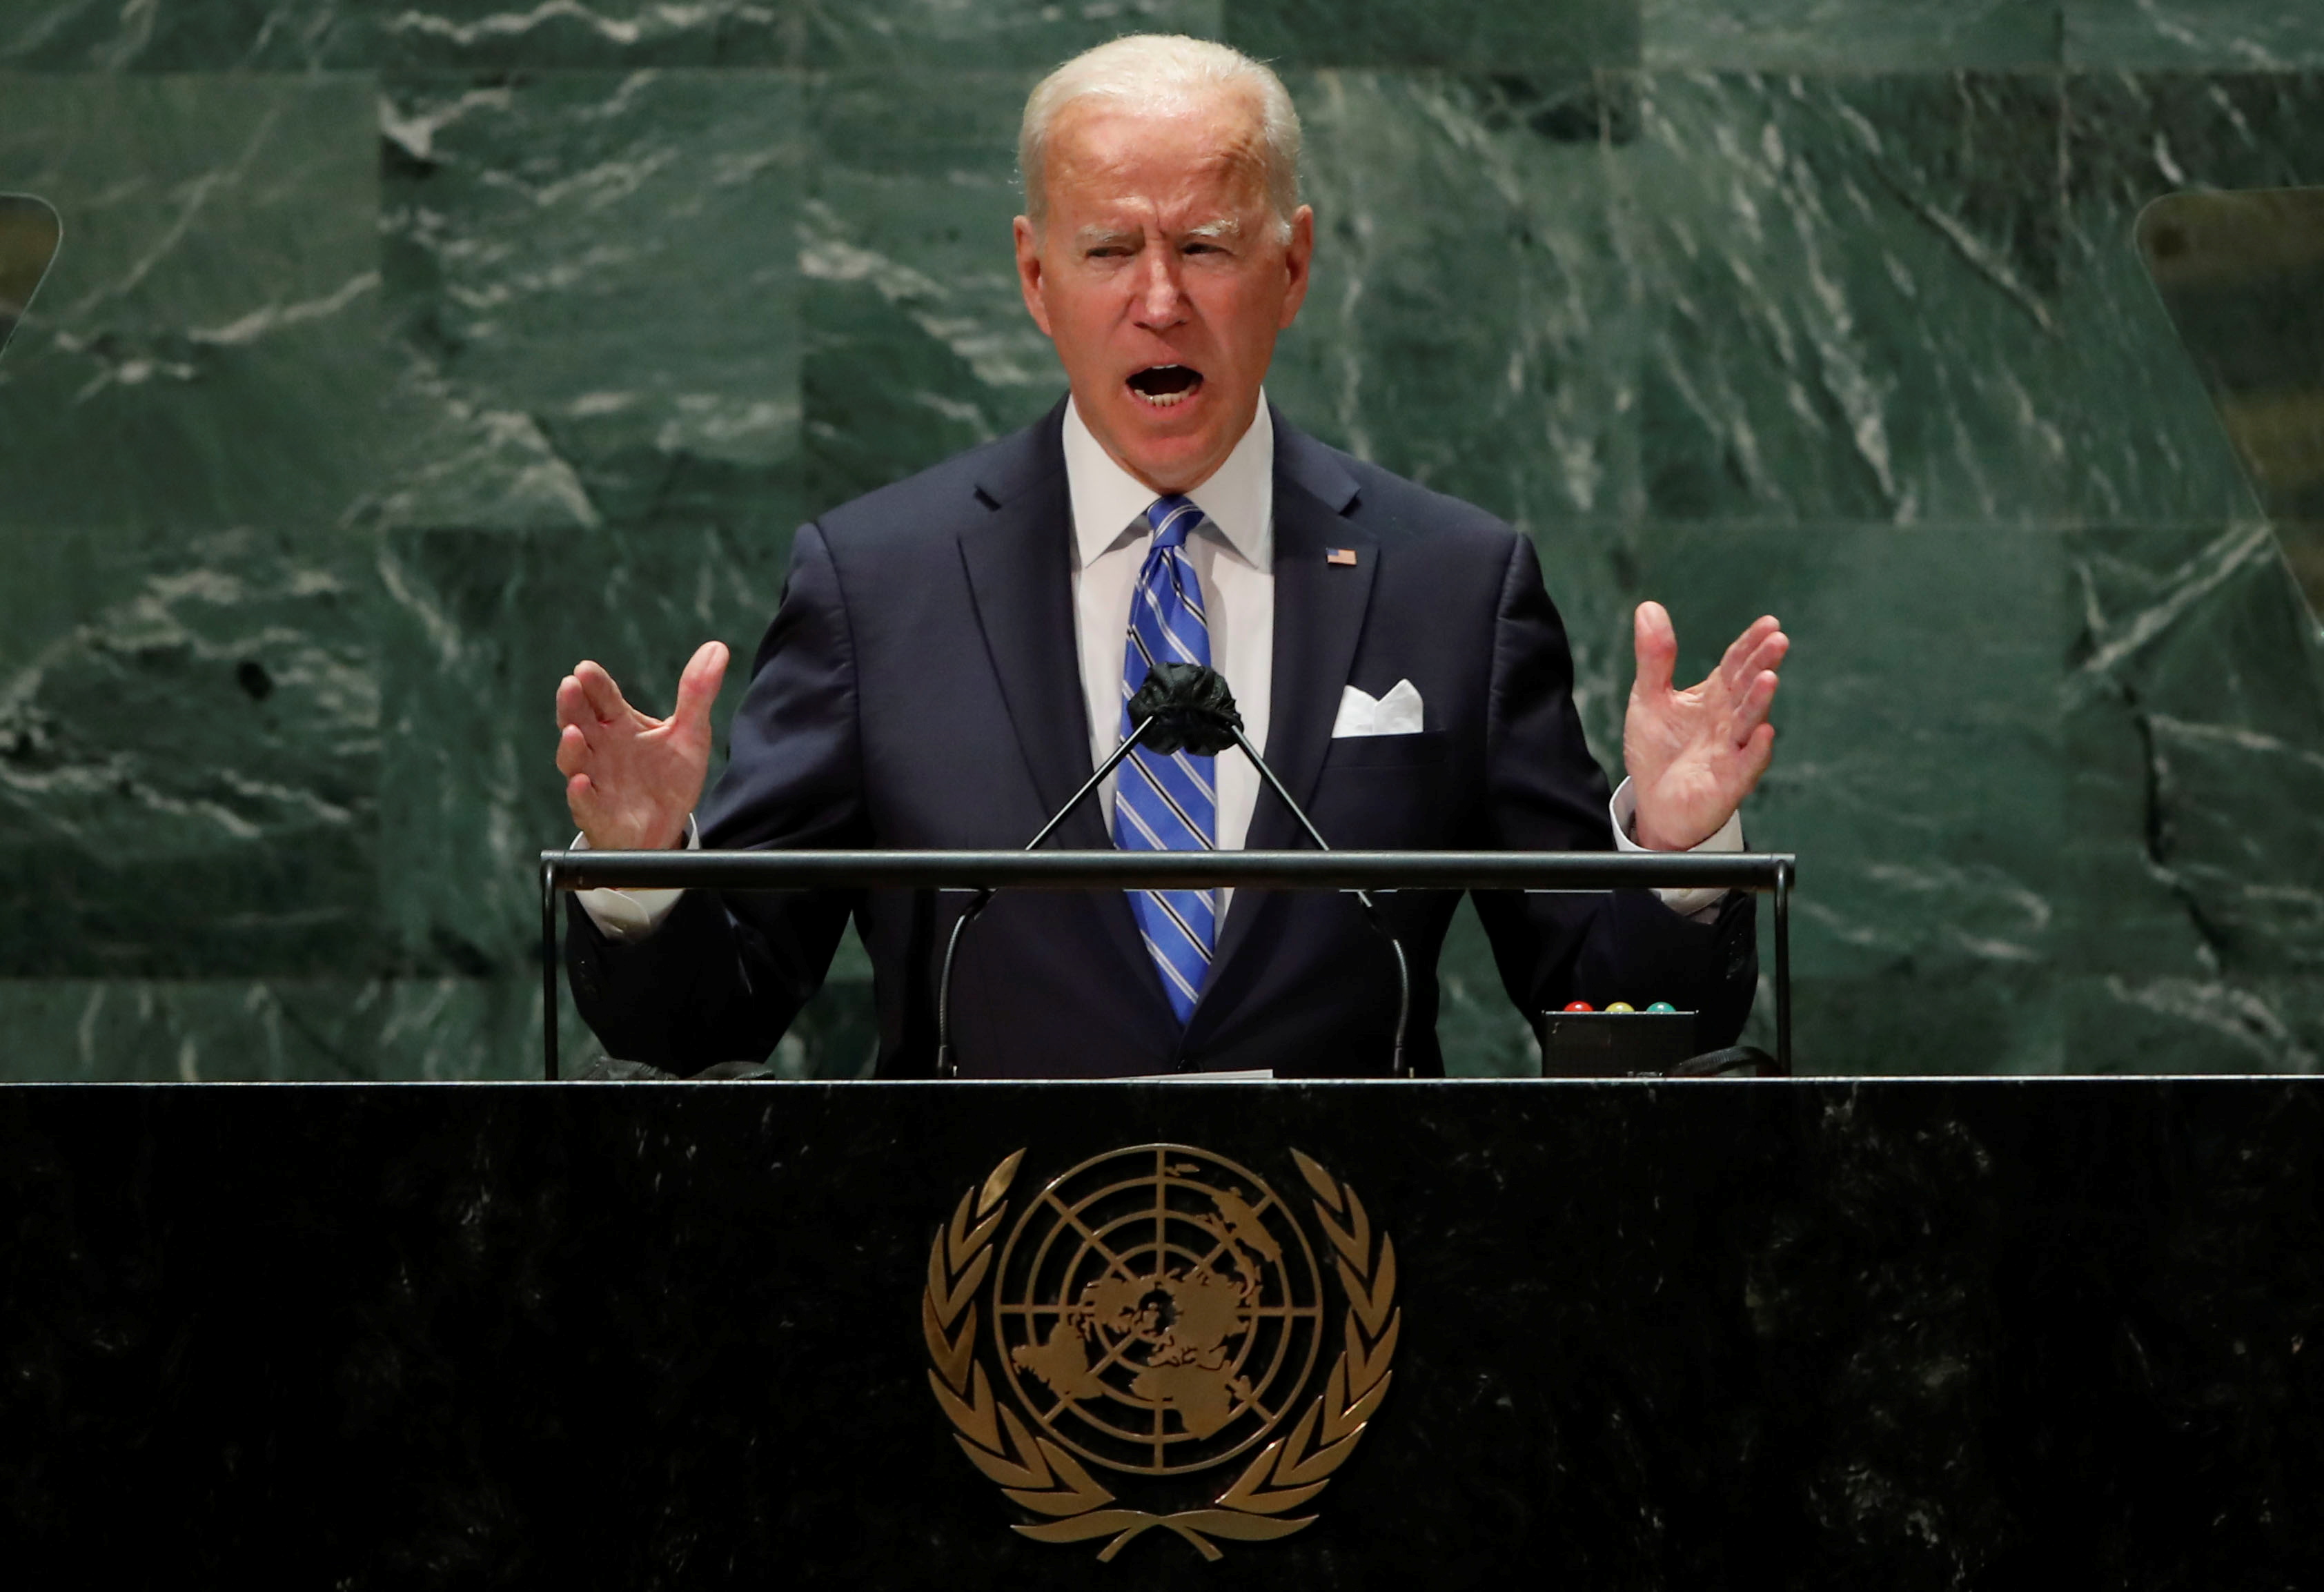 U.S. President Joe Biden addresses the 76th Session of the U.N. General Assembly in New York City